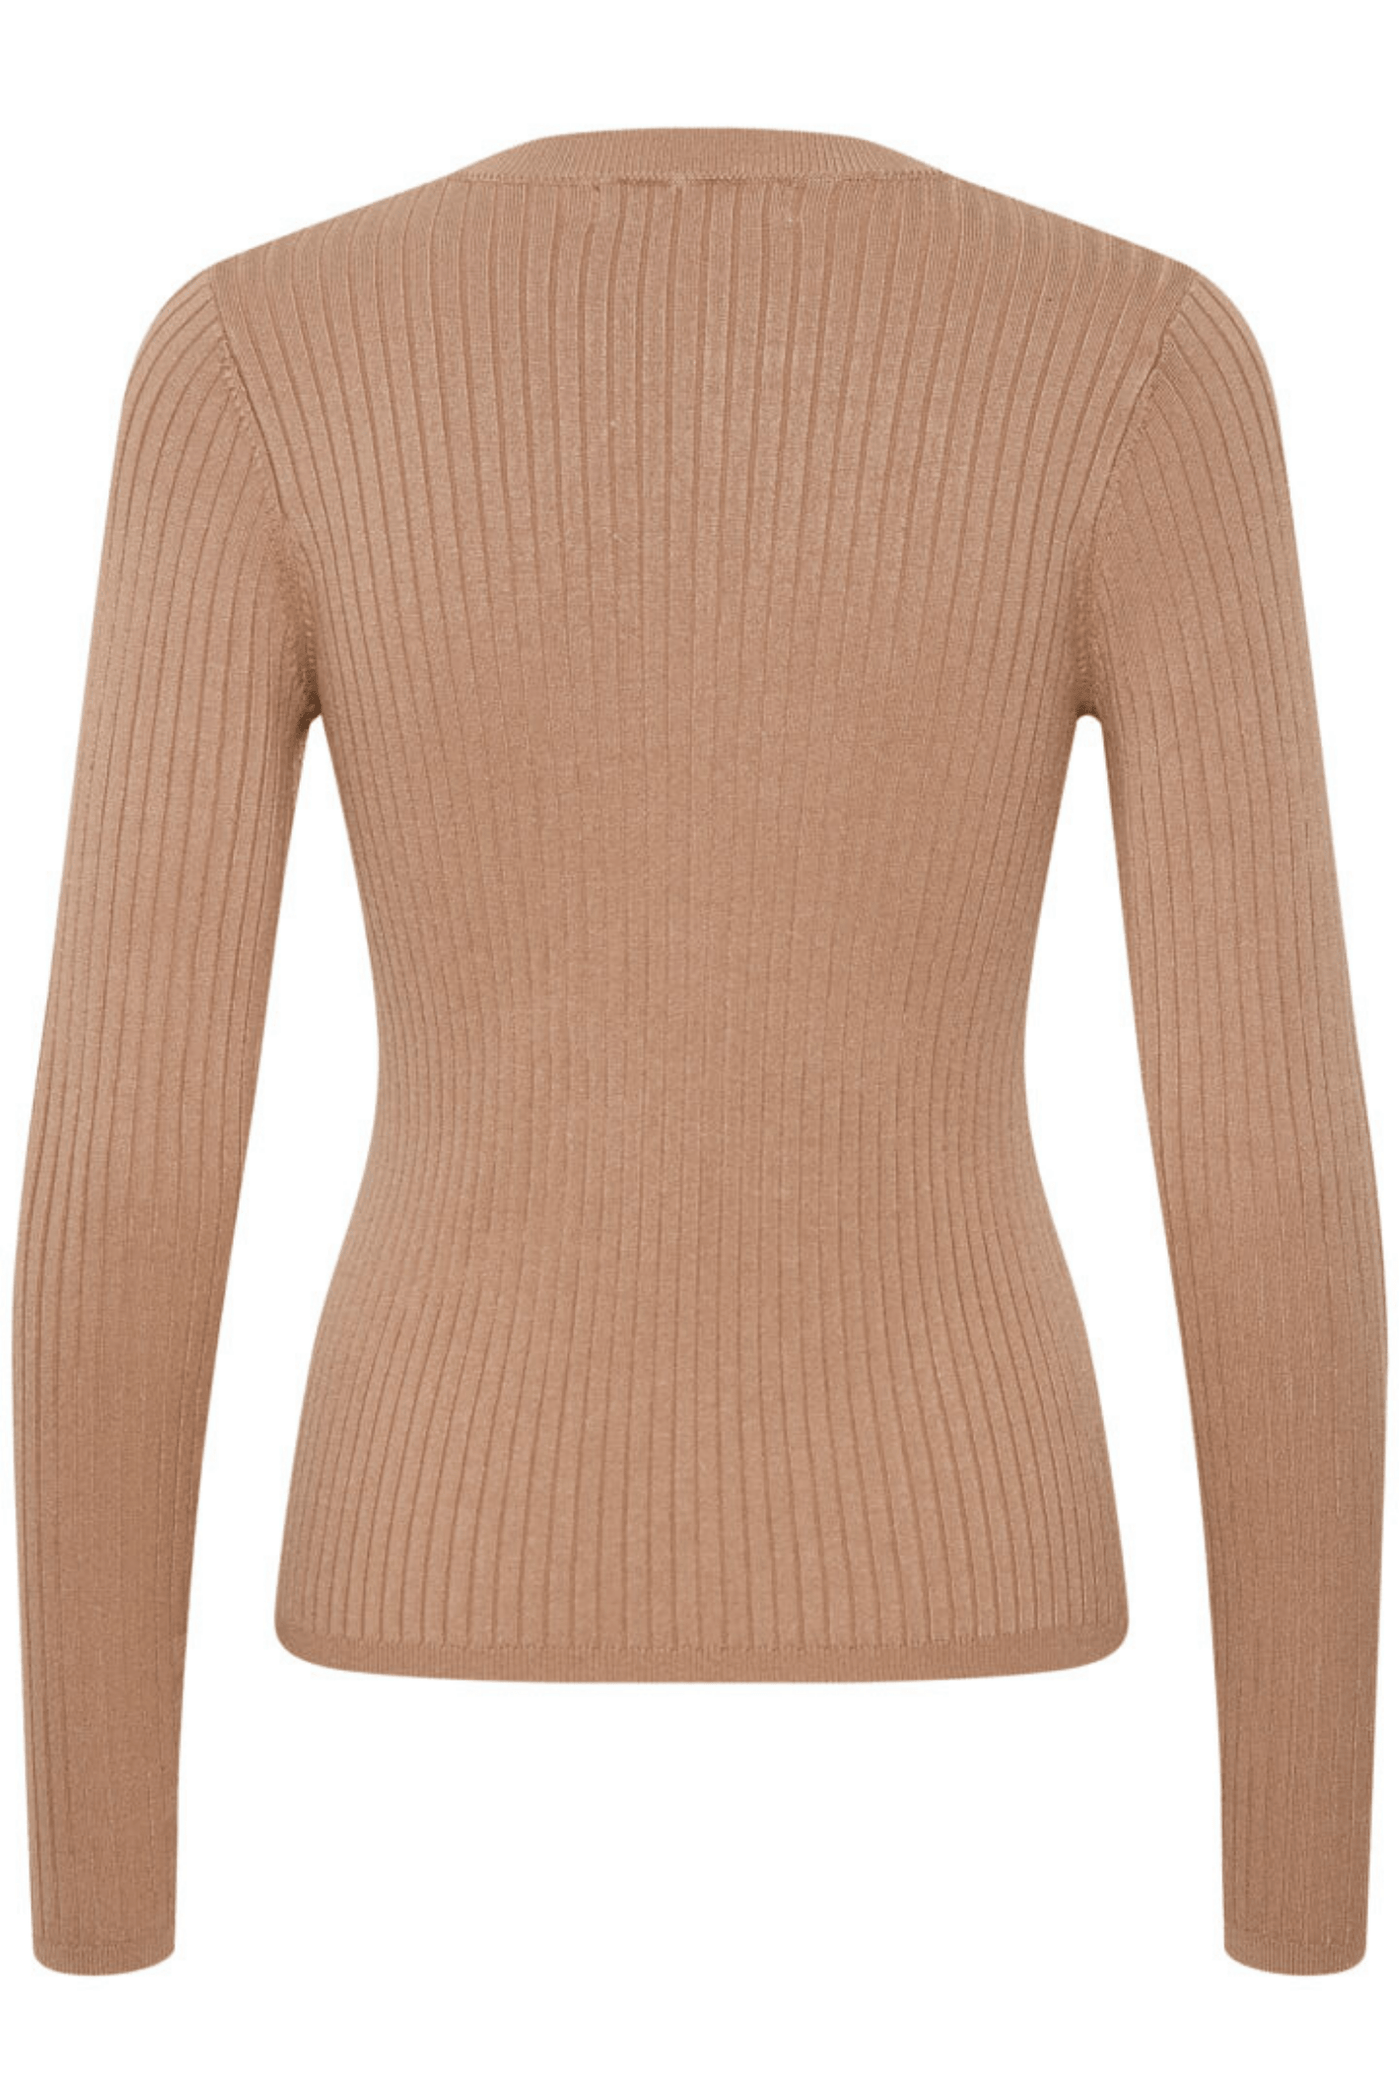 InWear Trinnel Camel Knitted Long Sleeved Top - Jezabel Boutique